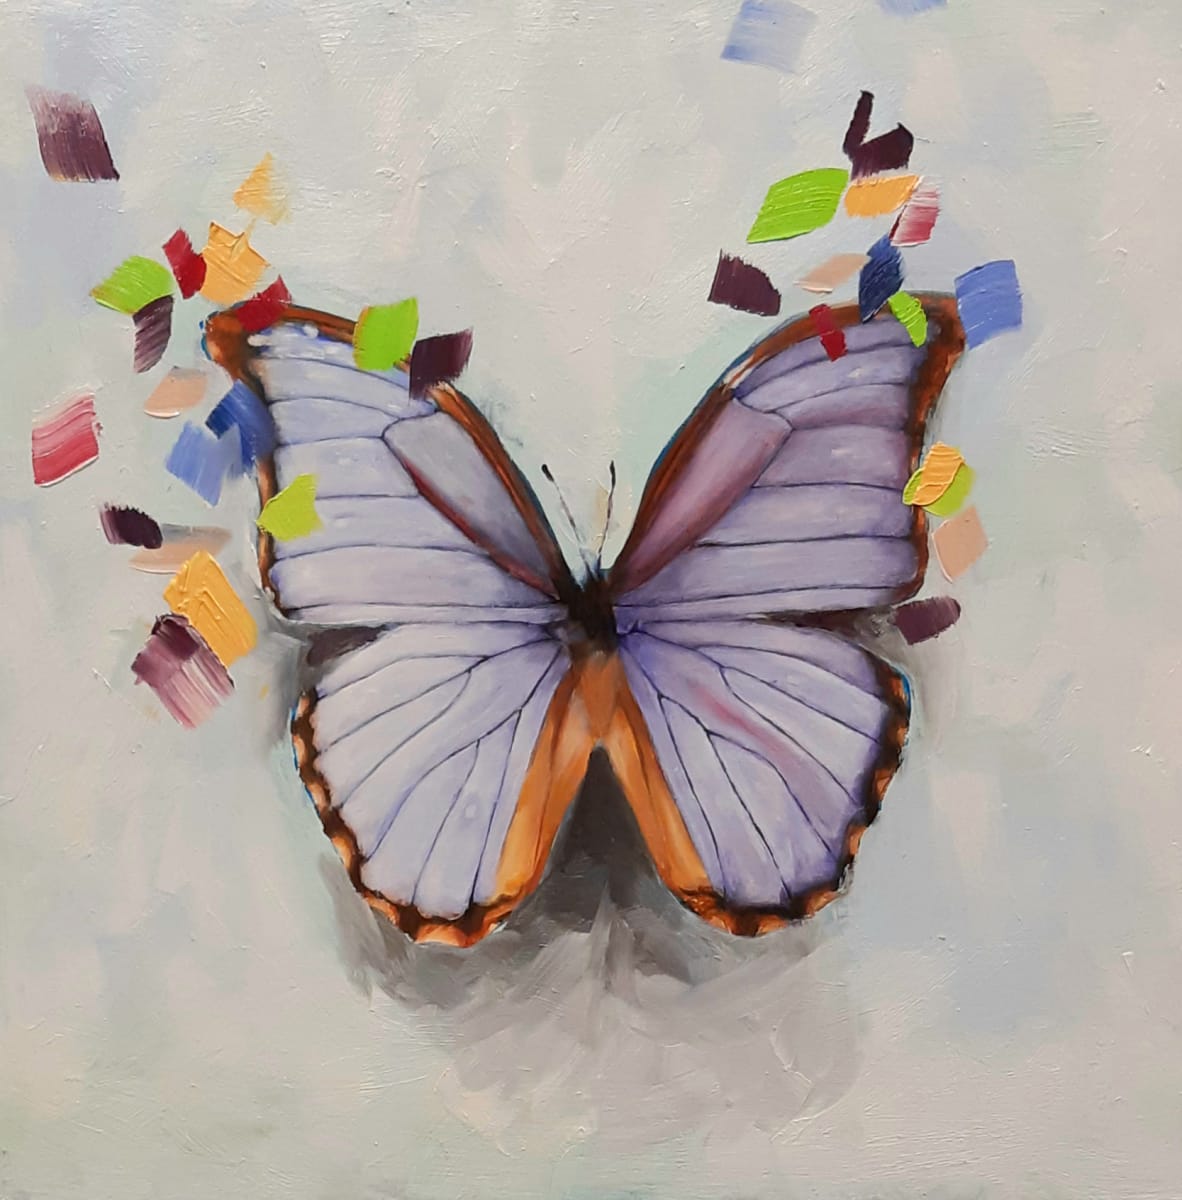 Blue Torpor by Catherine Mills  Image:  Blue Morpho, oil painting on gallery wood panel, 12 x 12 inches